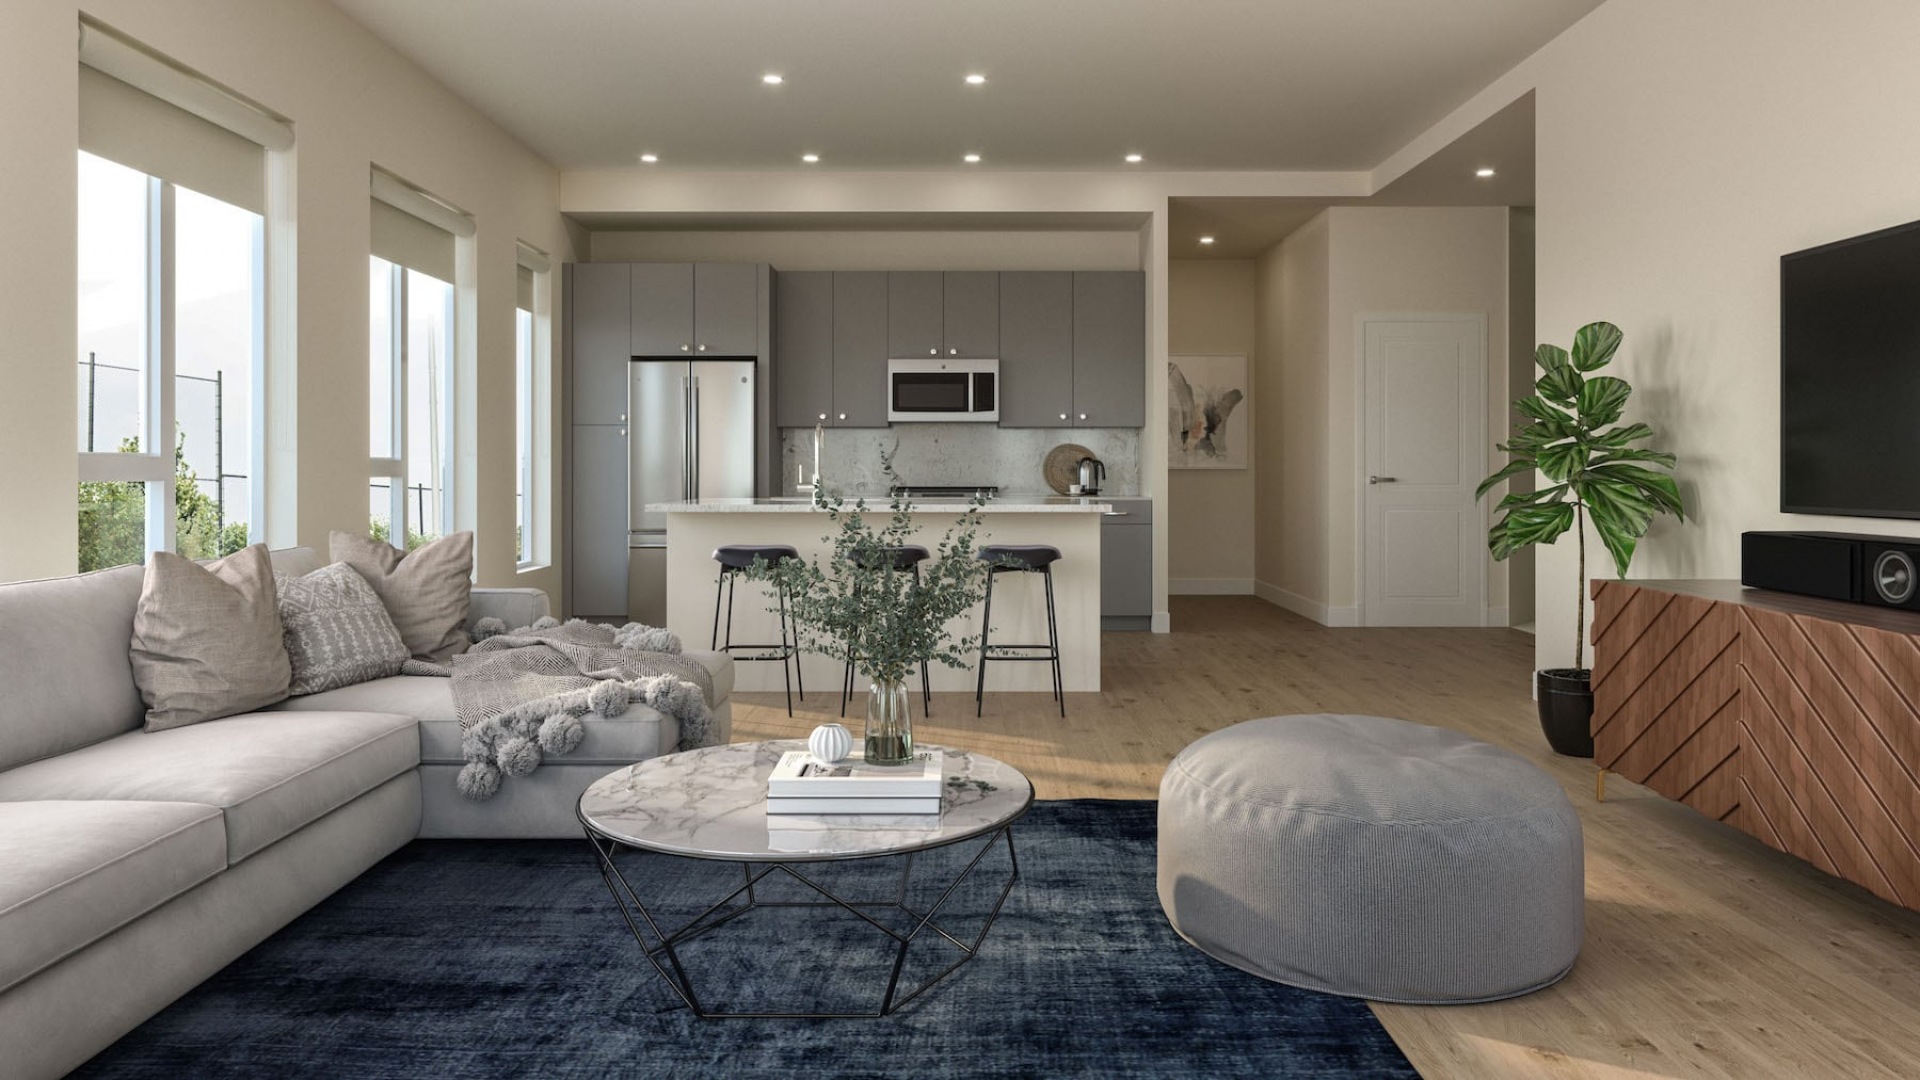 open living concept with a connected kitchen. dining and living room, with spacious walkability in between areas